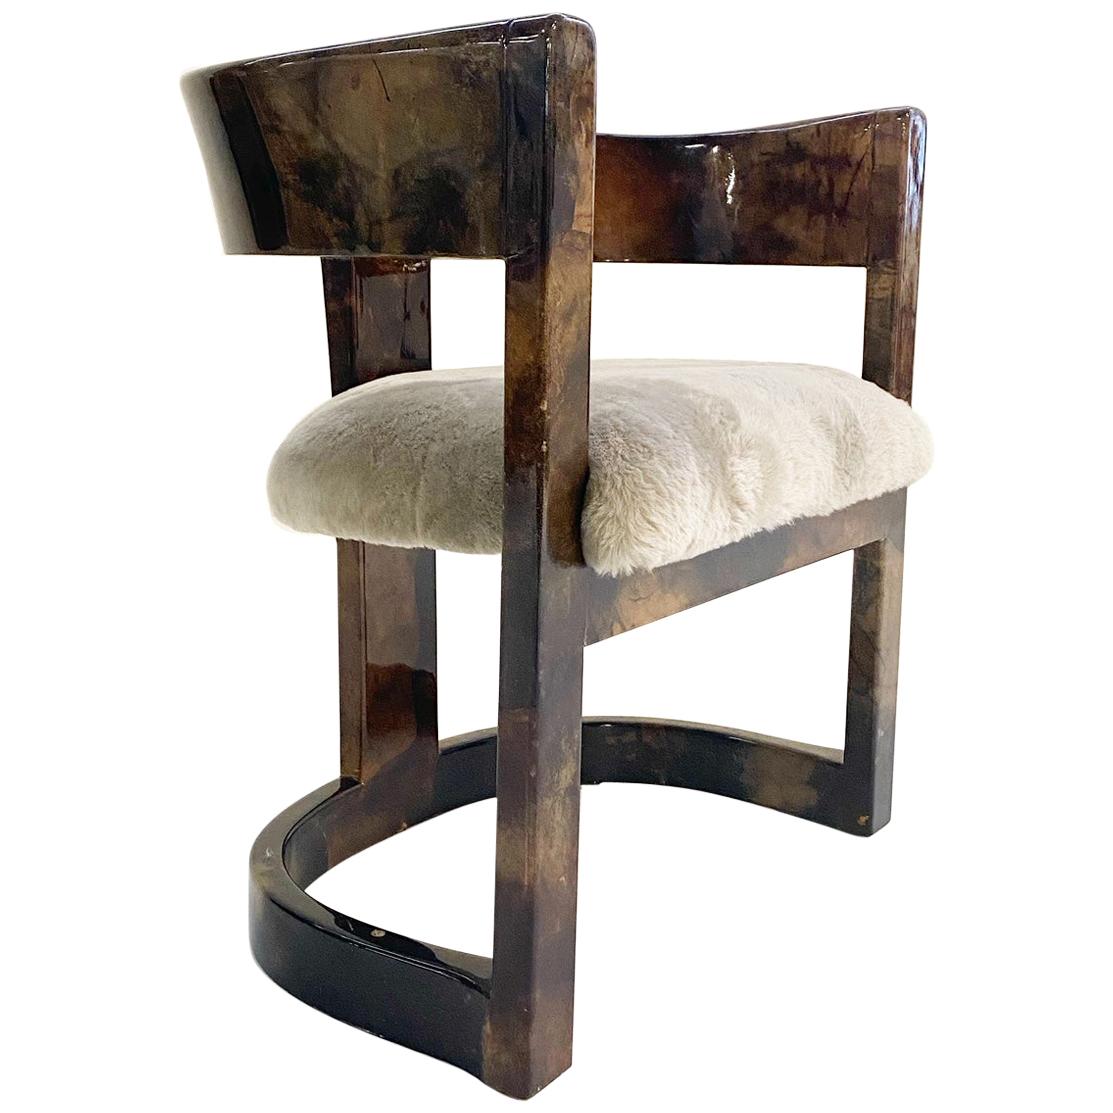 Karl Springer Lacquered Goatskin Armchair in Shearling